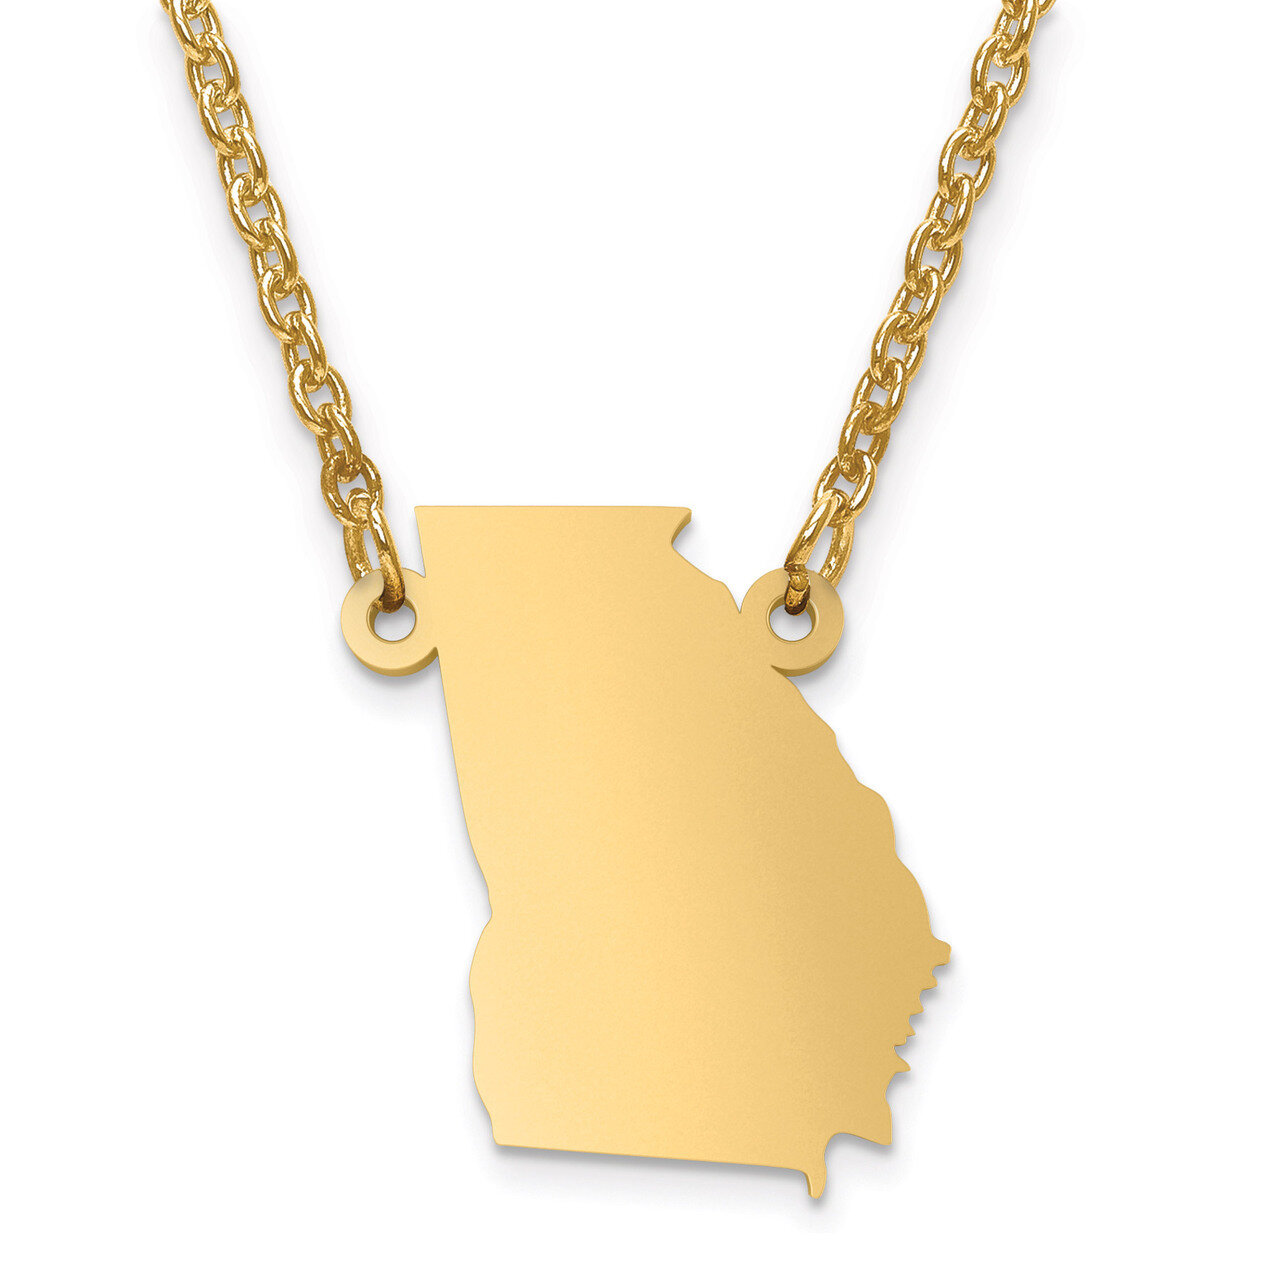 Georgia State Pendant with Chain Engravable Gold-plated on Sterling Silver